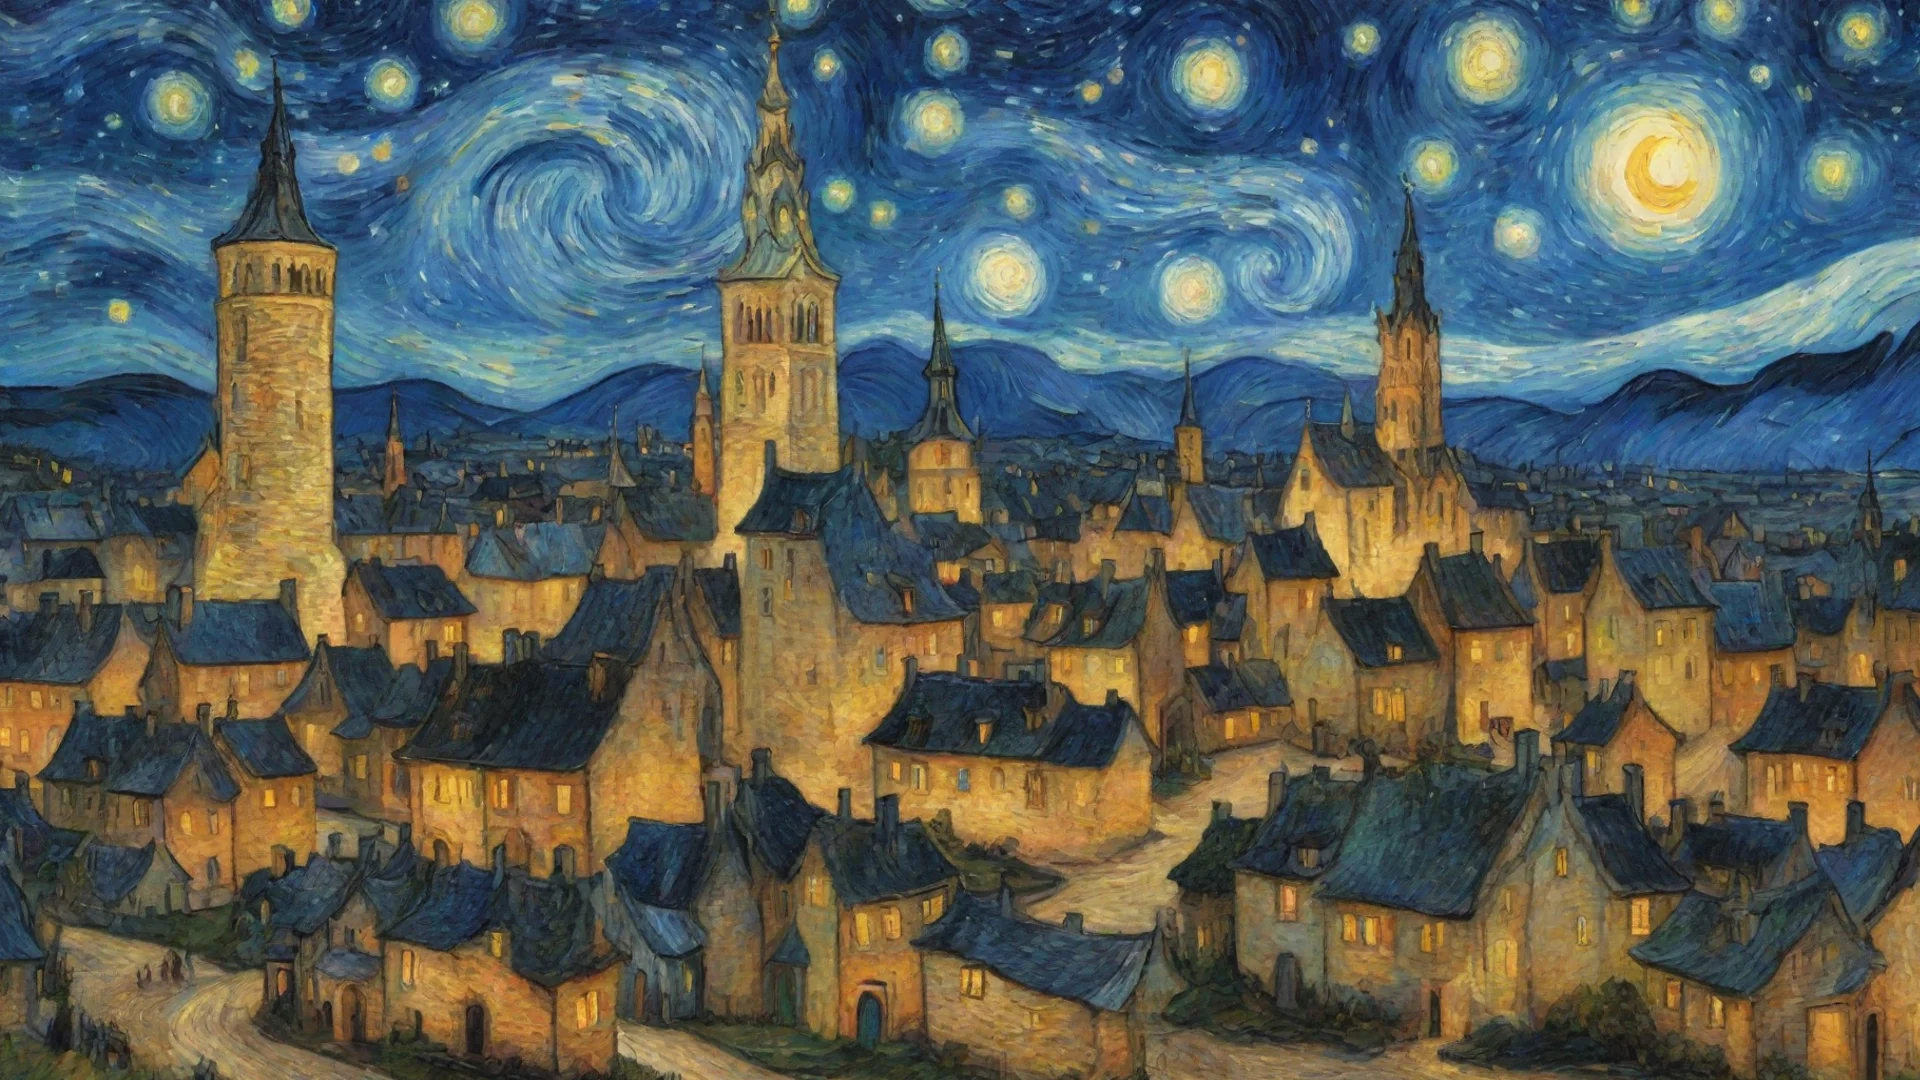 amazing artistic van gogh village at night starry spiraling towers amazing hd aesthetic awesome portrait 2 wide